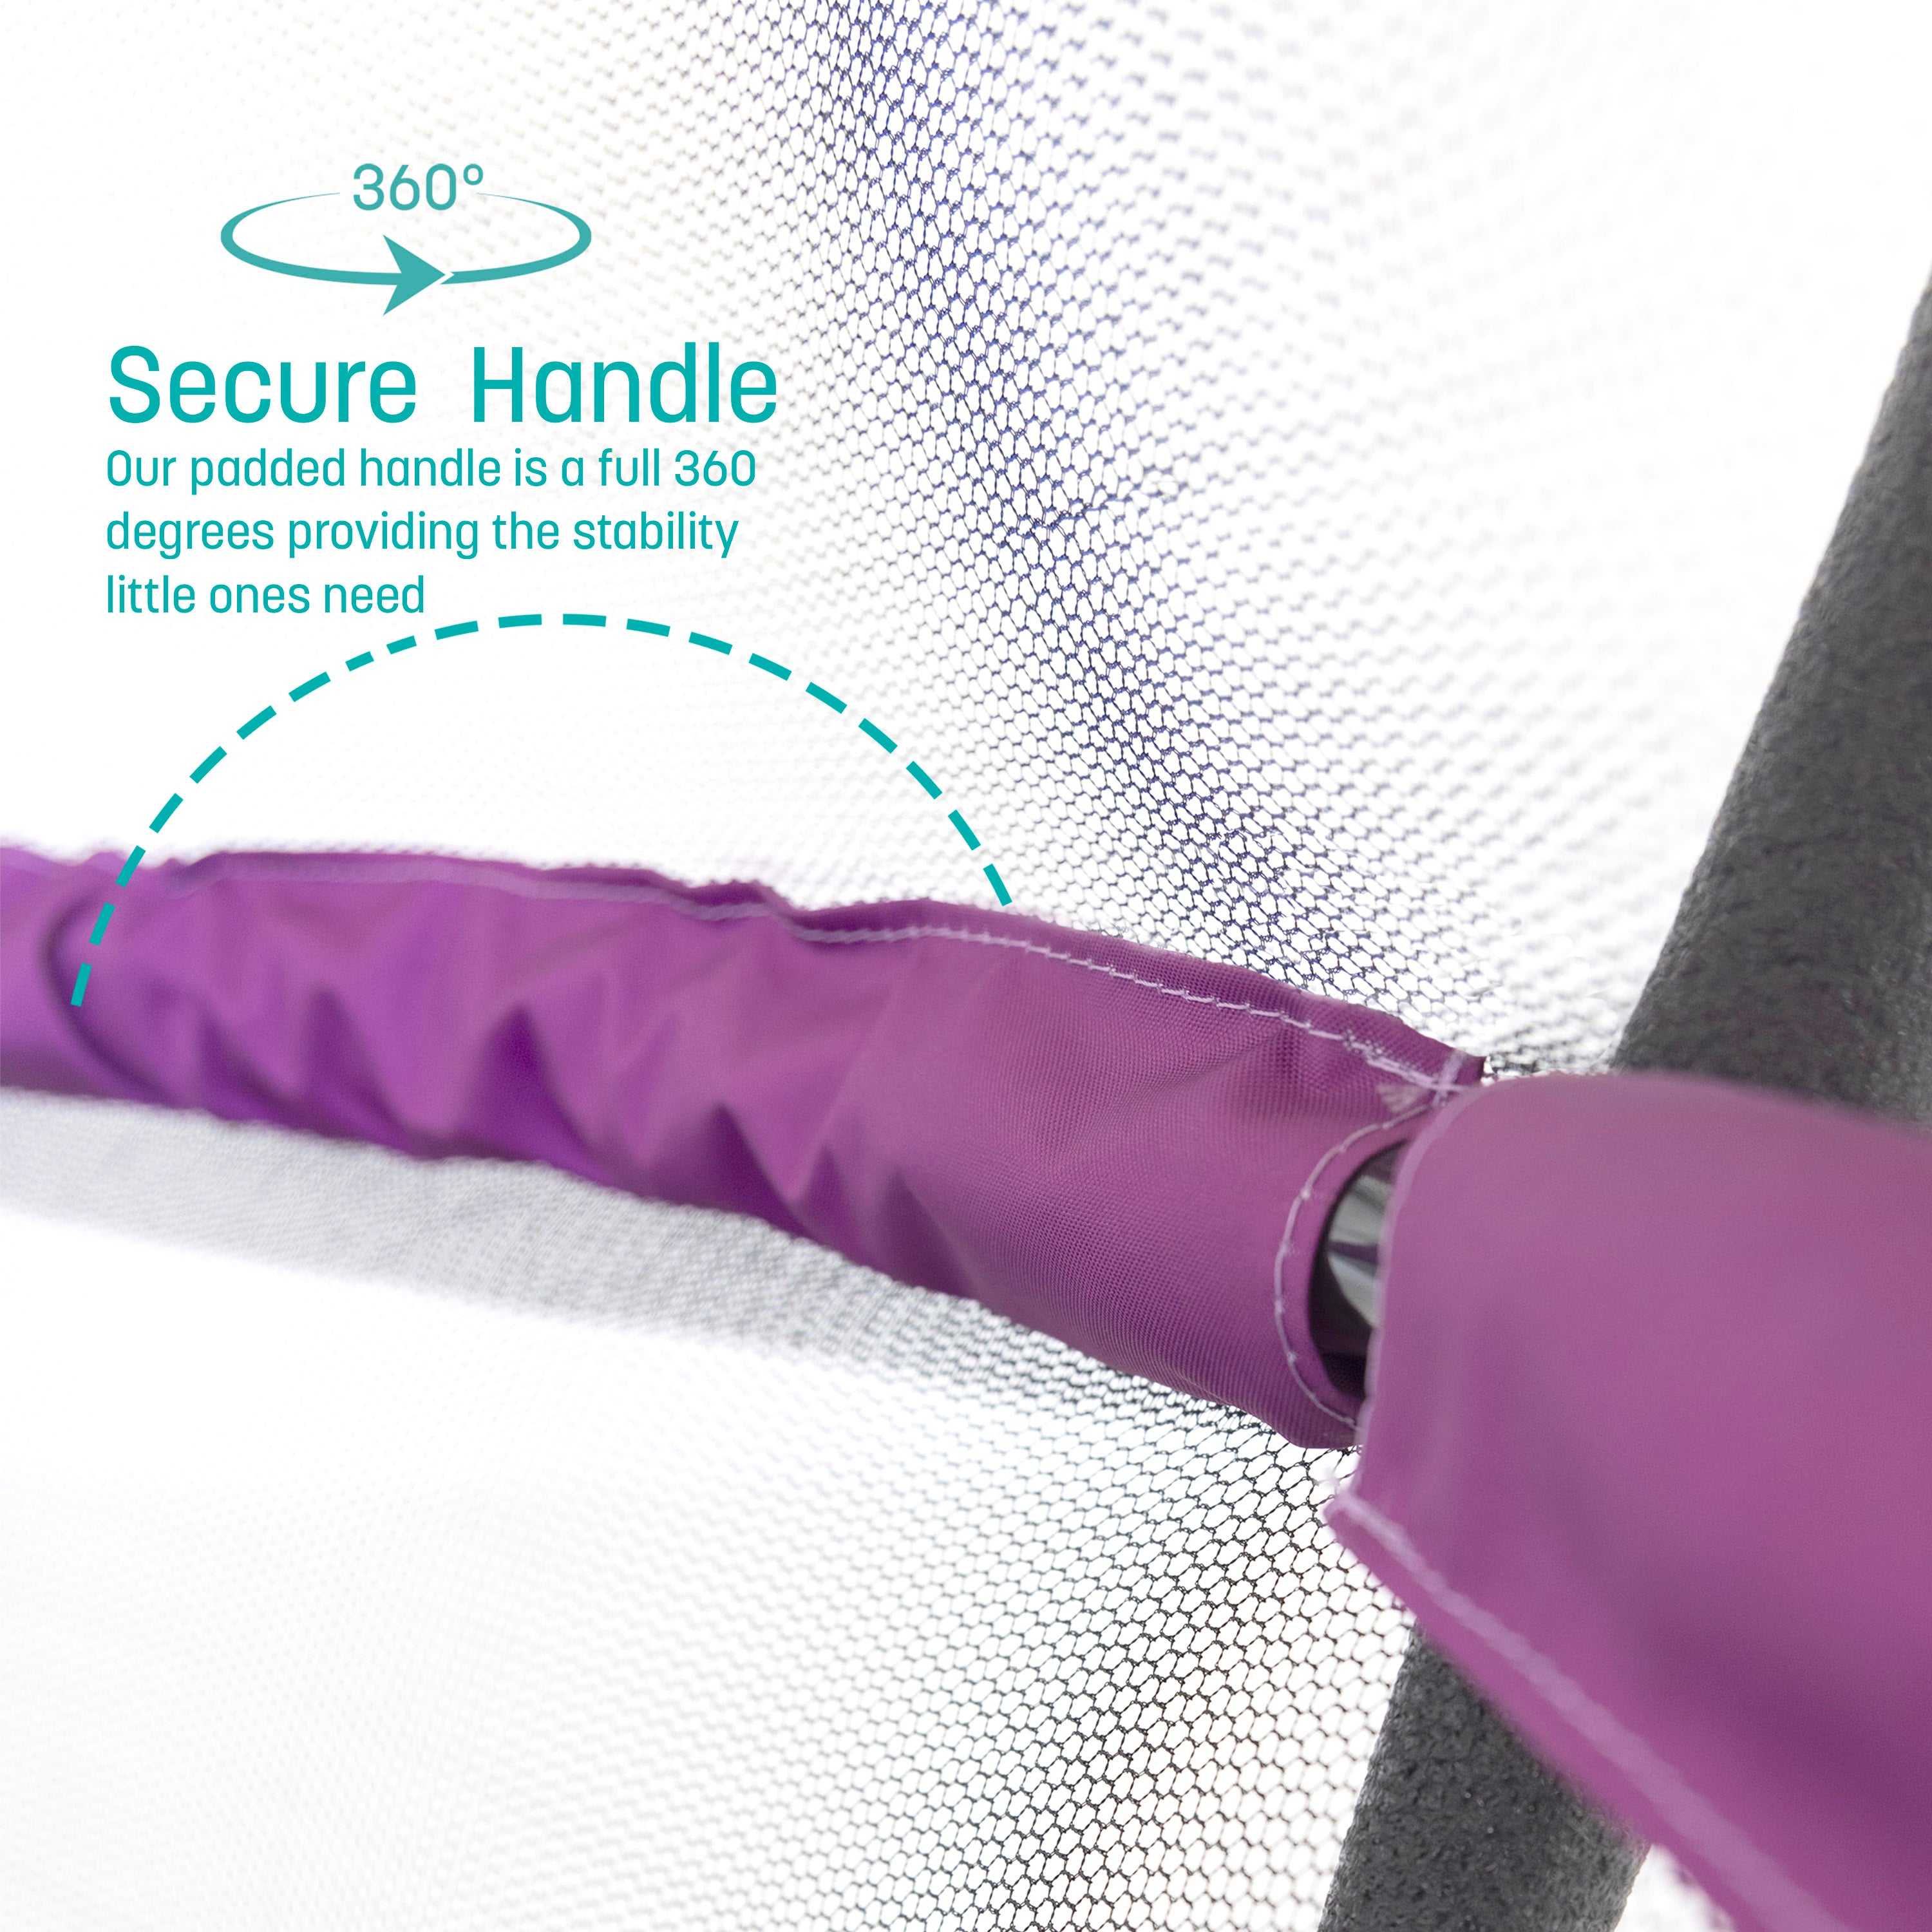 The handlebar has a purple padded sleeve. A teal callout feature states, “ Secure Handle: Our padded handle is a full 360 degrees providing the stability little ones need”.